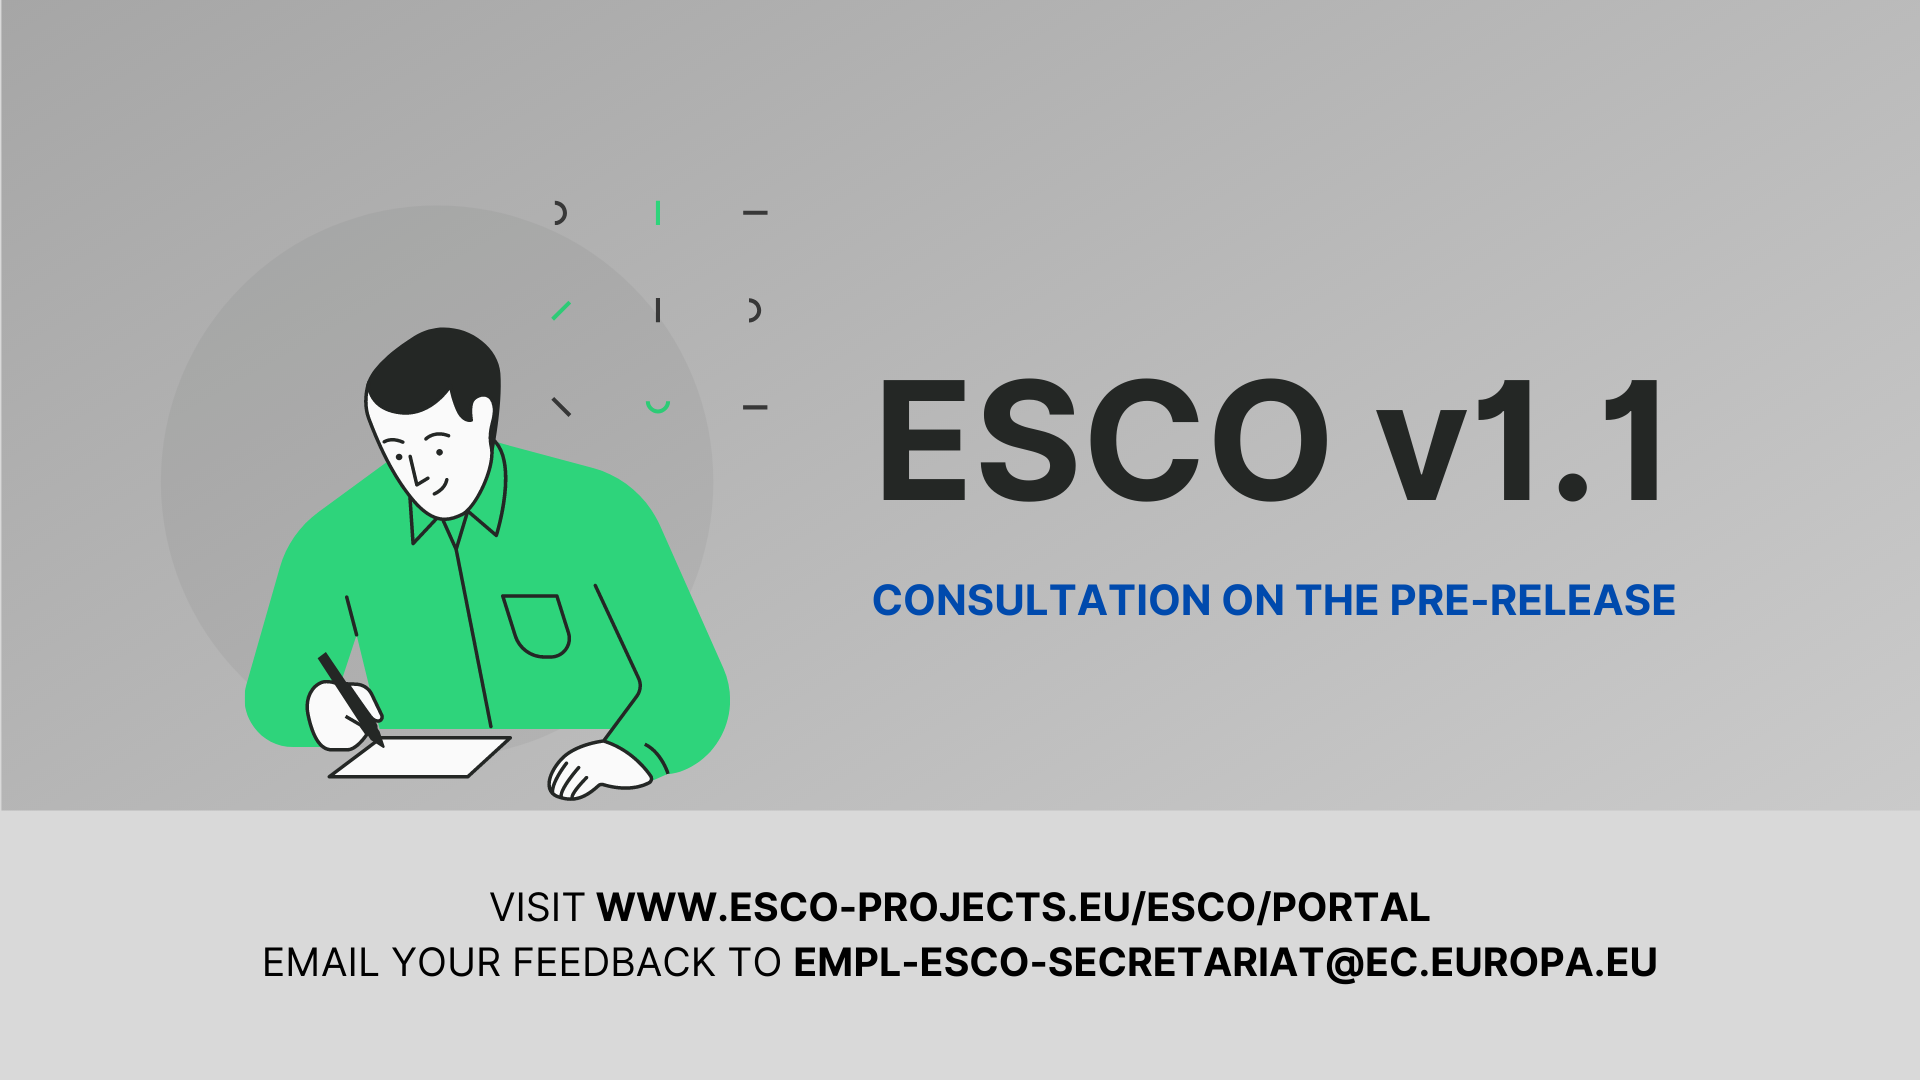 Image with a man icon writing down on the paper and text: ESCO V1.1: Consultation on the pre-release